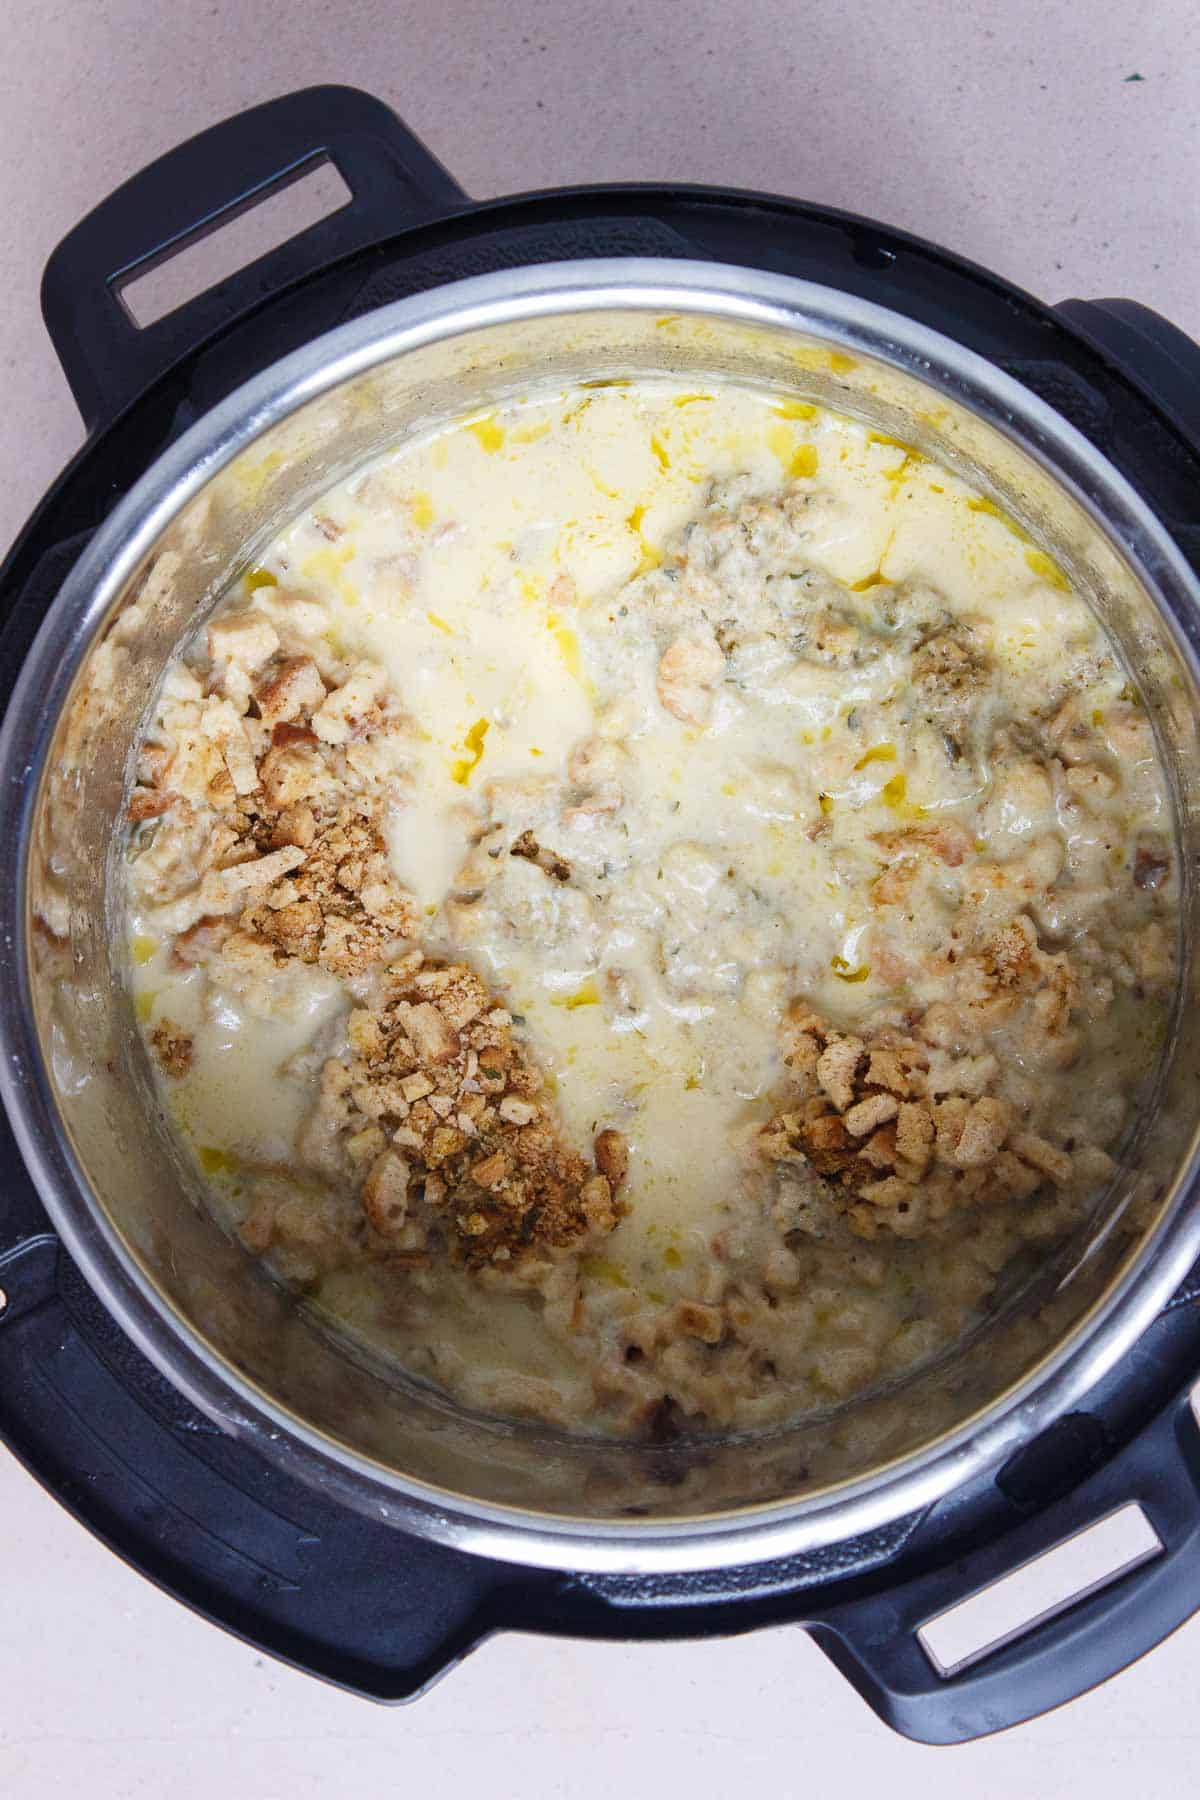 Instant Pot Chicken Stuffing Casserole after a quick release of pressure. Most of the stuffing is submerged in liquid with some dry mix remaining.